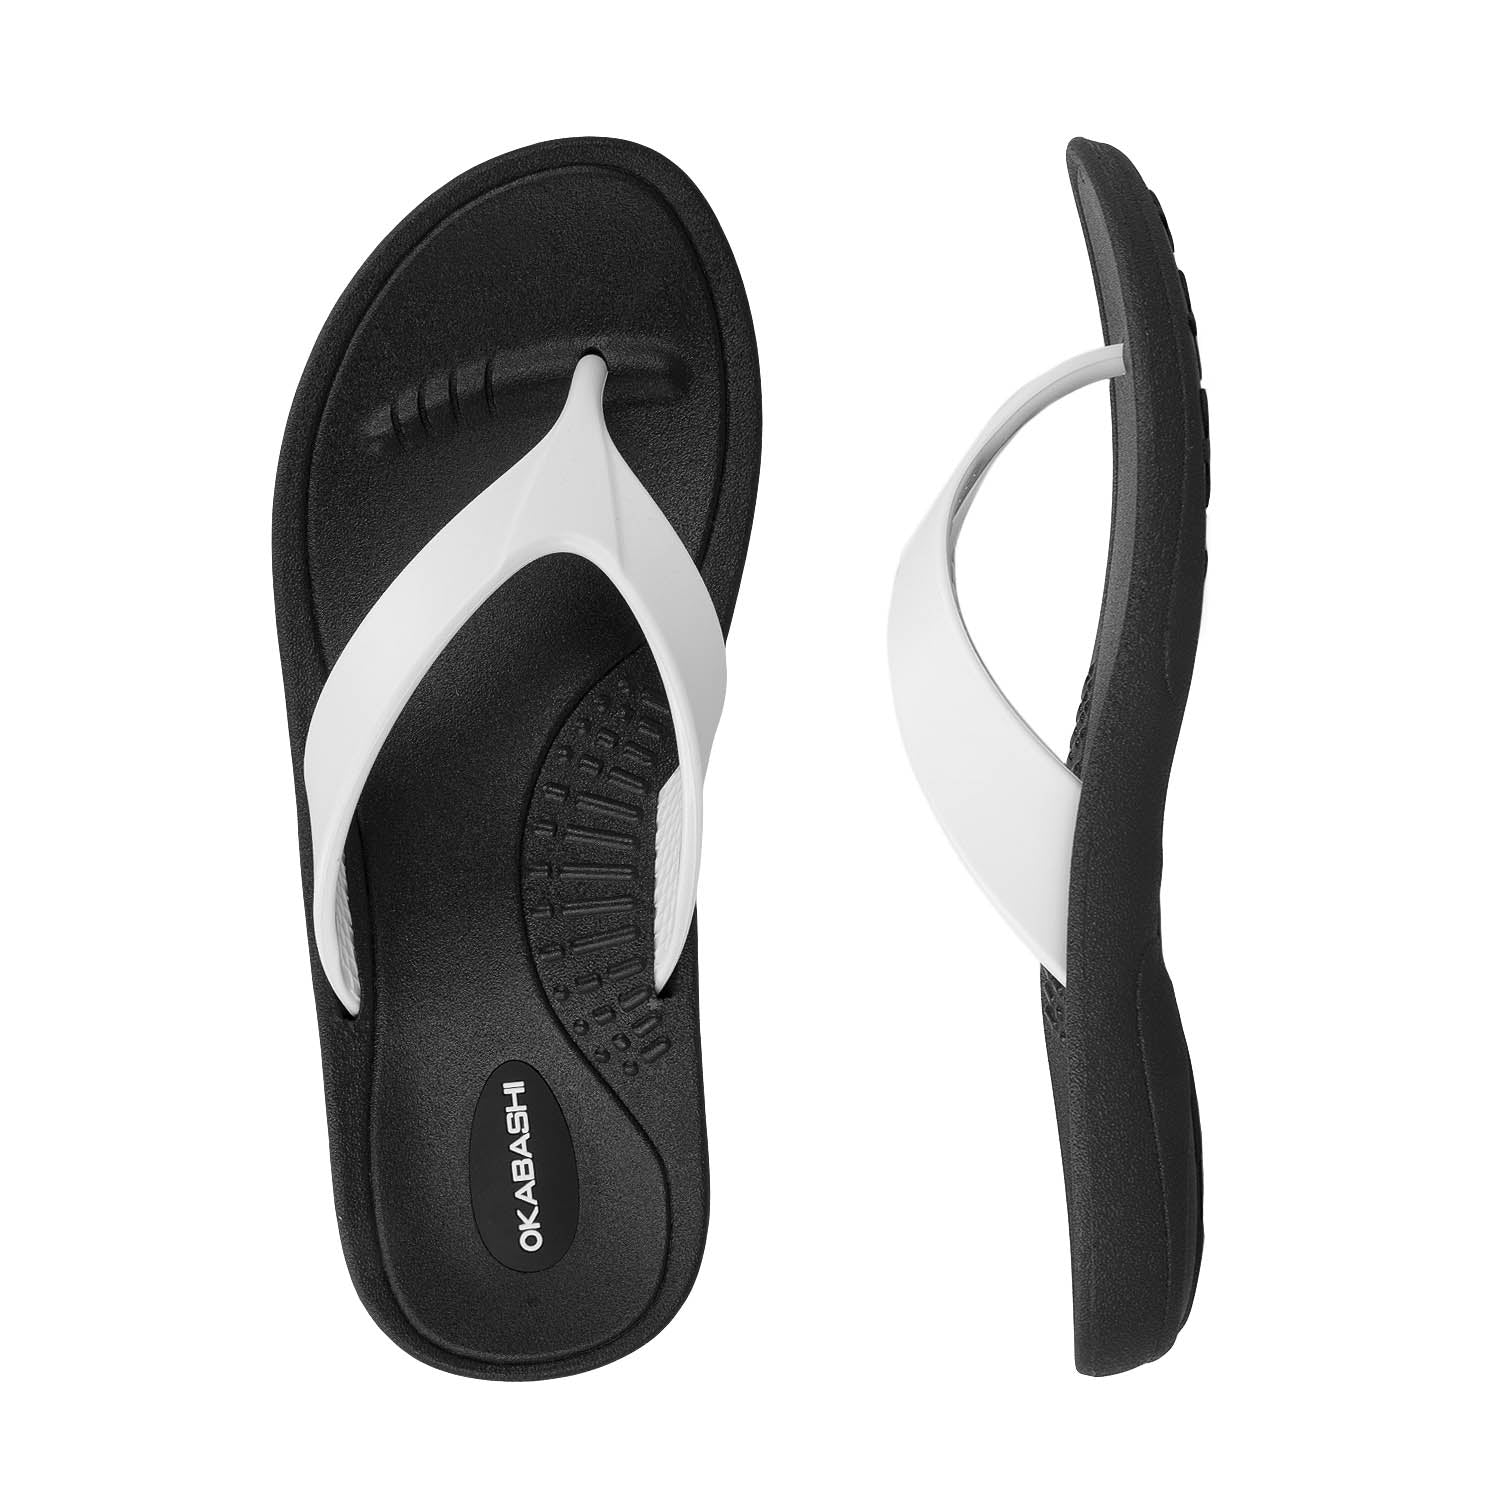 white fit flops size 6